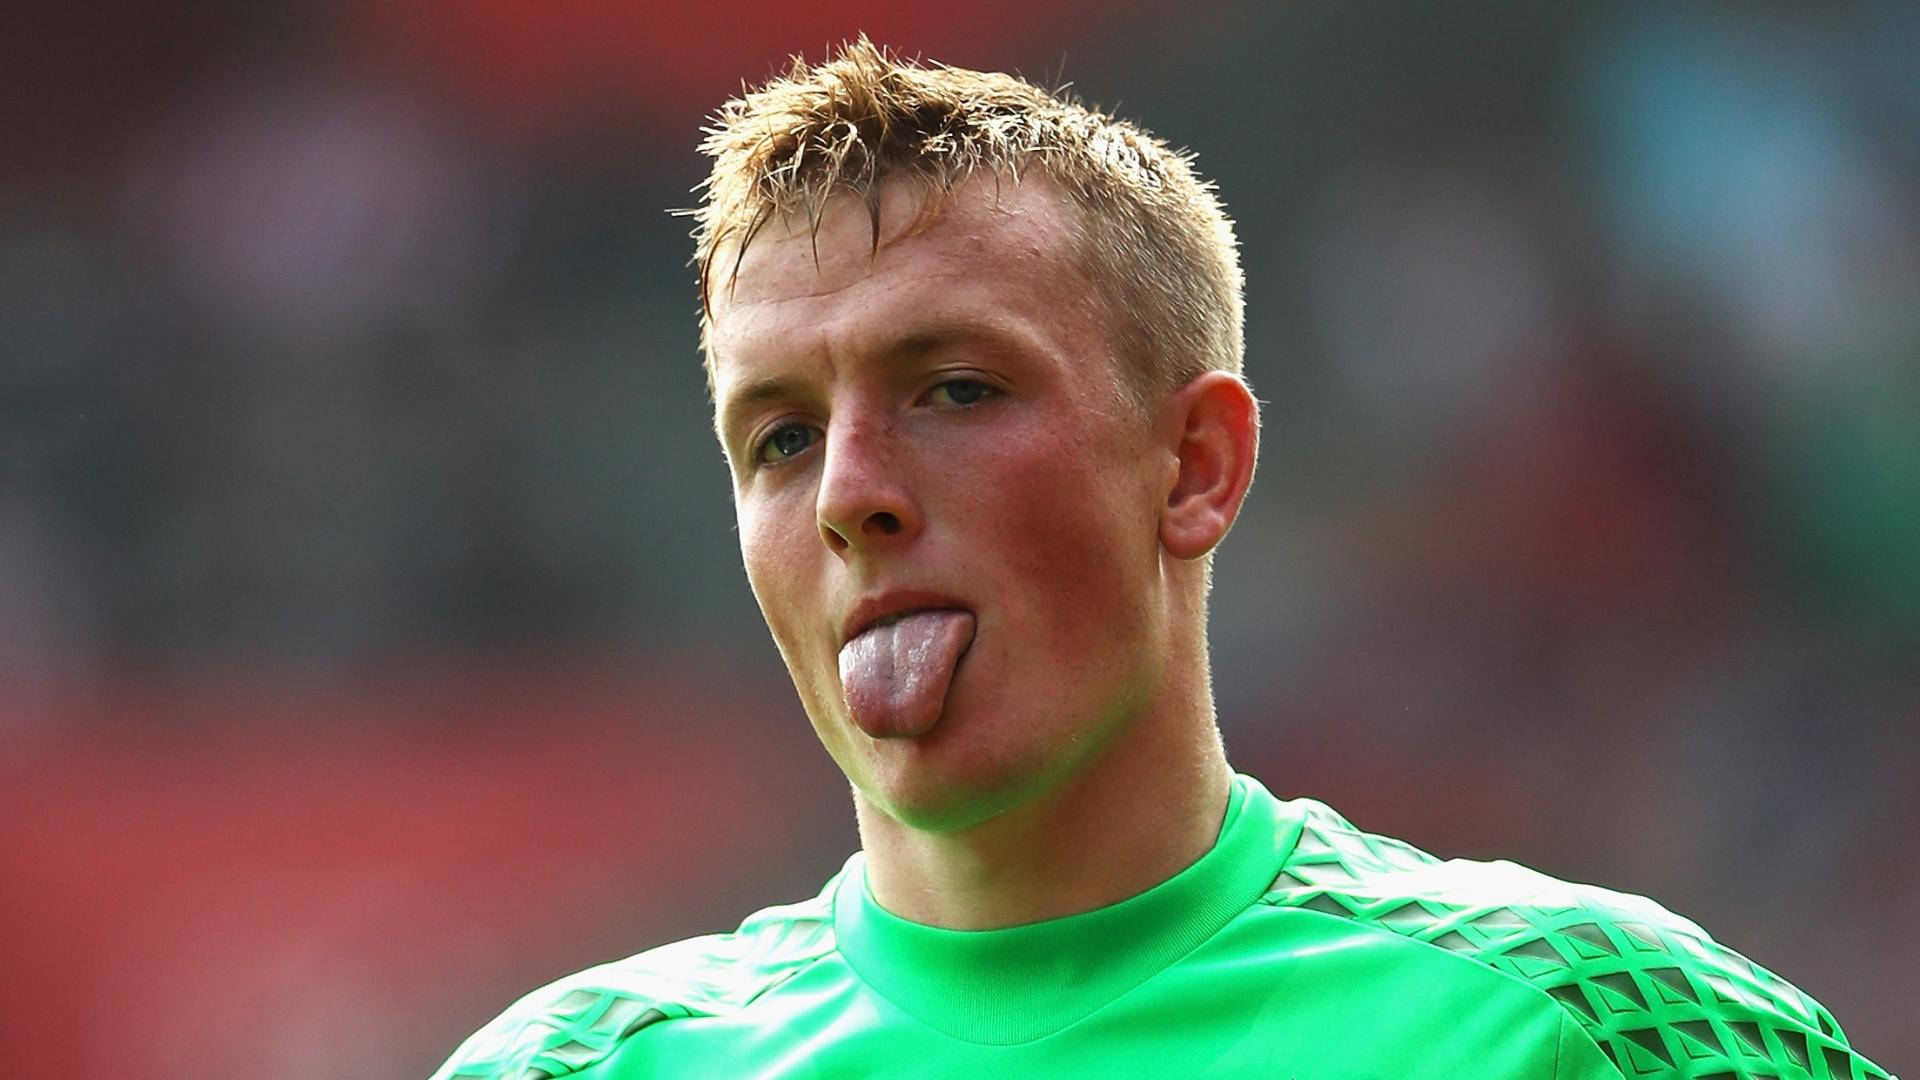 Jordan Pickford Tongue Out Background